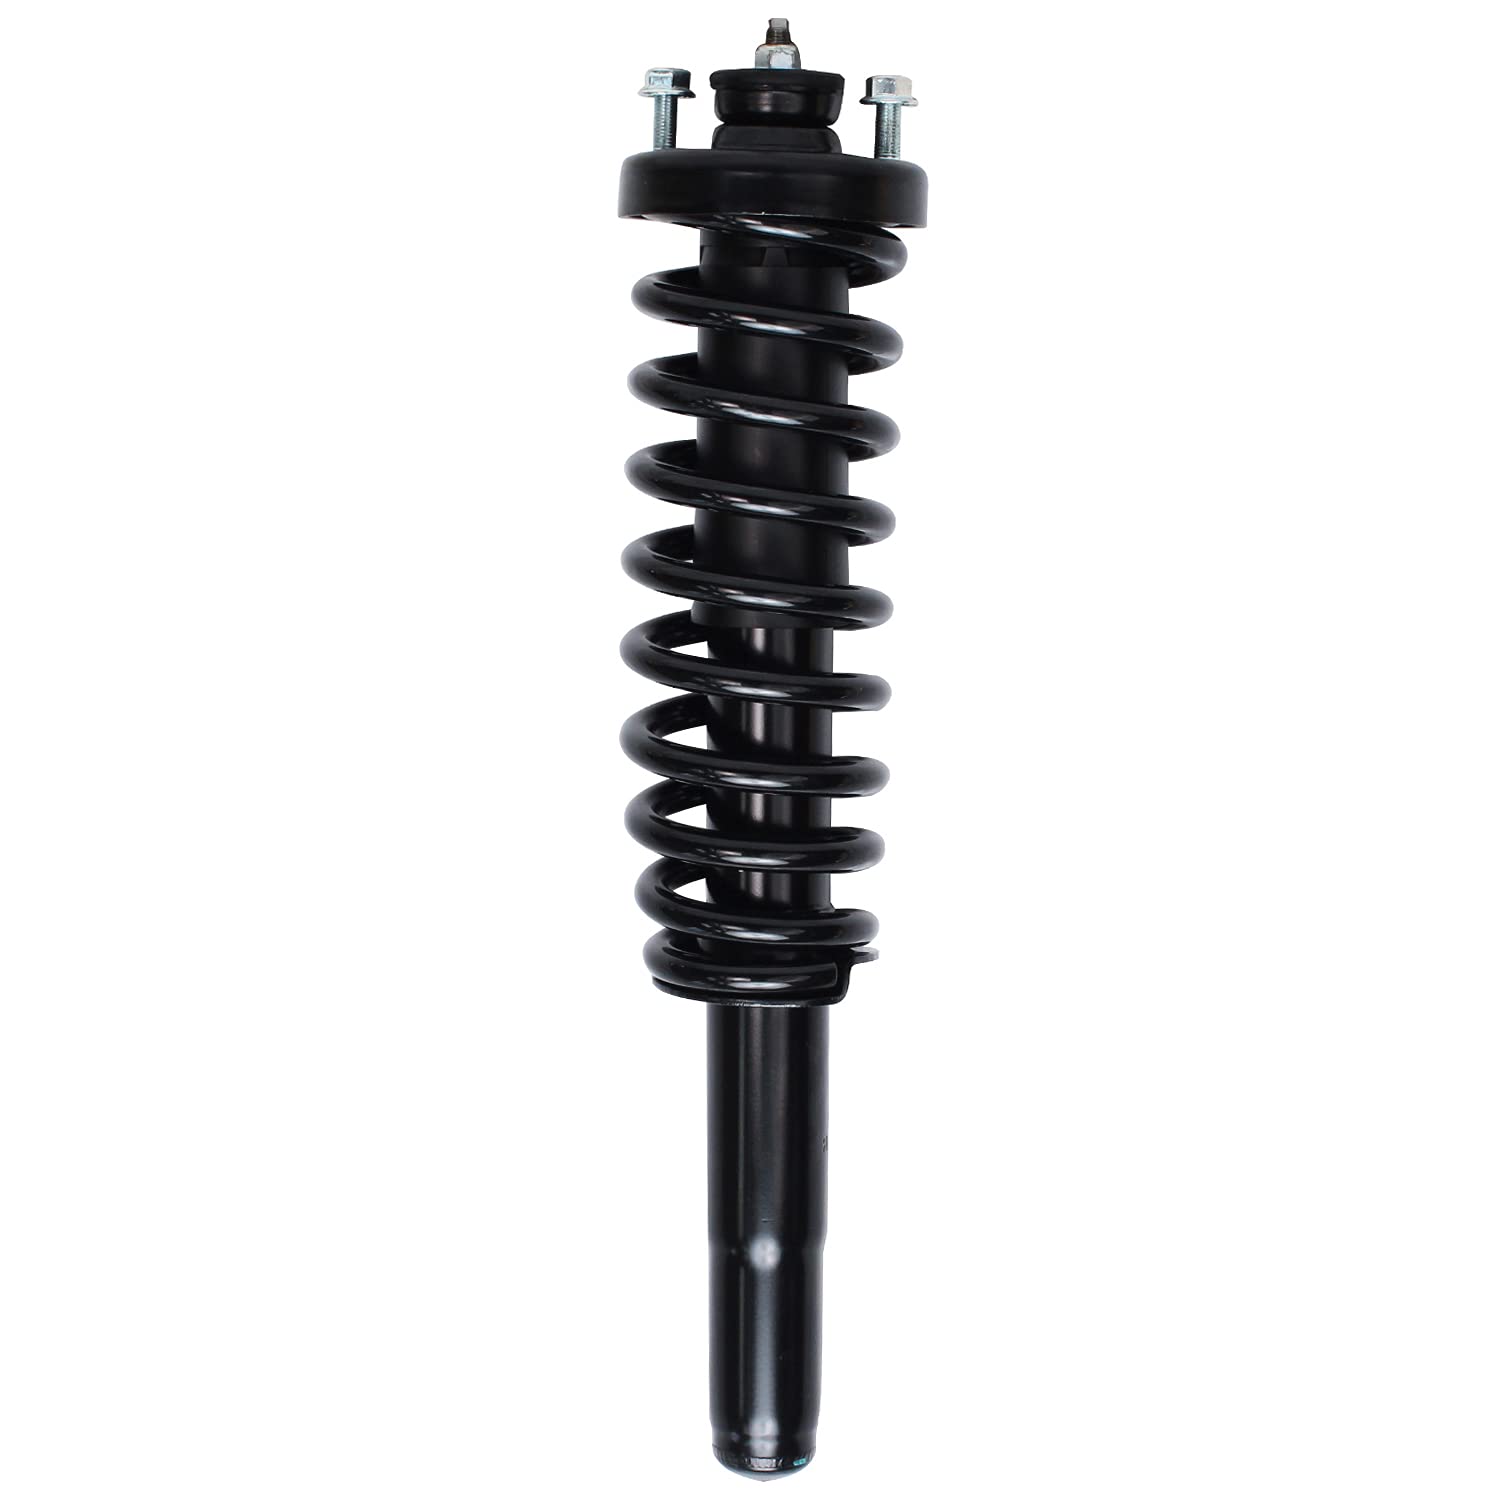 Detroit Axle - Front Struts for 1997-2001 Honda CR-V Complete 2 Struts with Coil Spring 1998 1999 2000 Replacement Quick Install Ready Struts Assembly